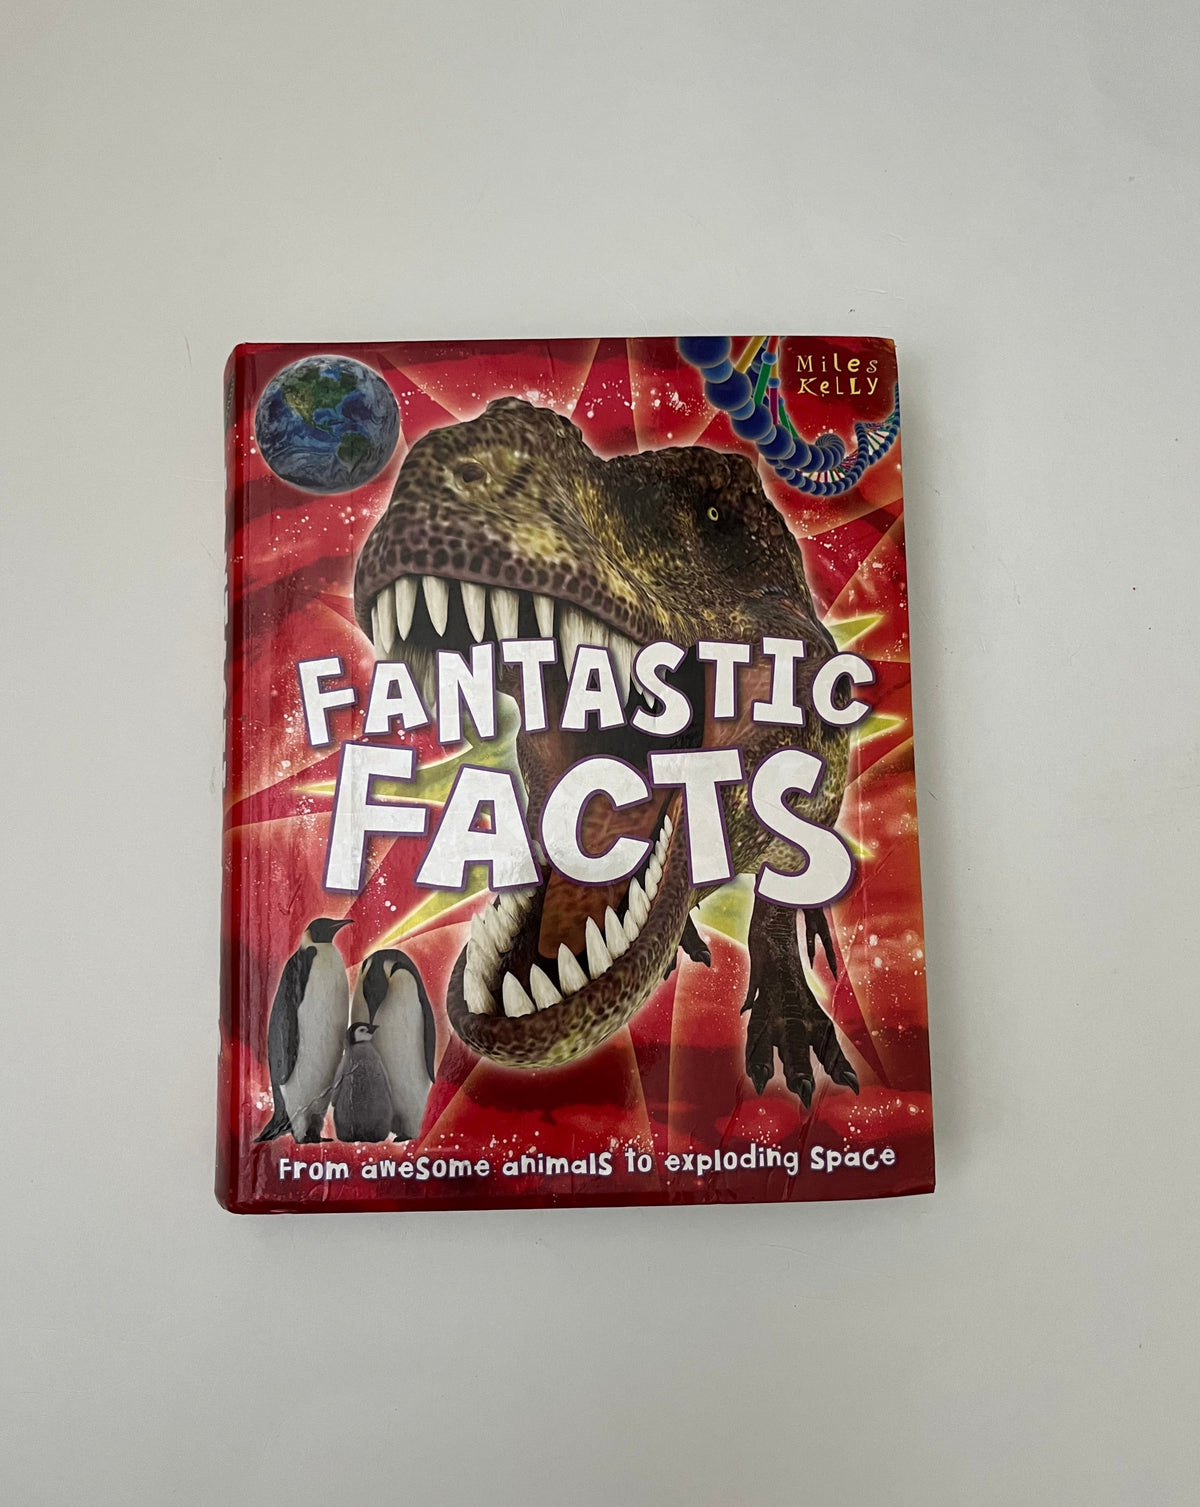 Fantastic Facts: From Awesome Animals to Exploding Space by Miles Kelly